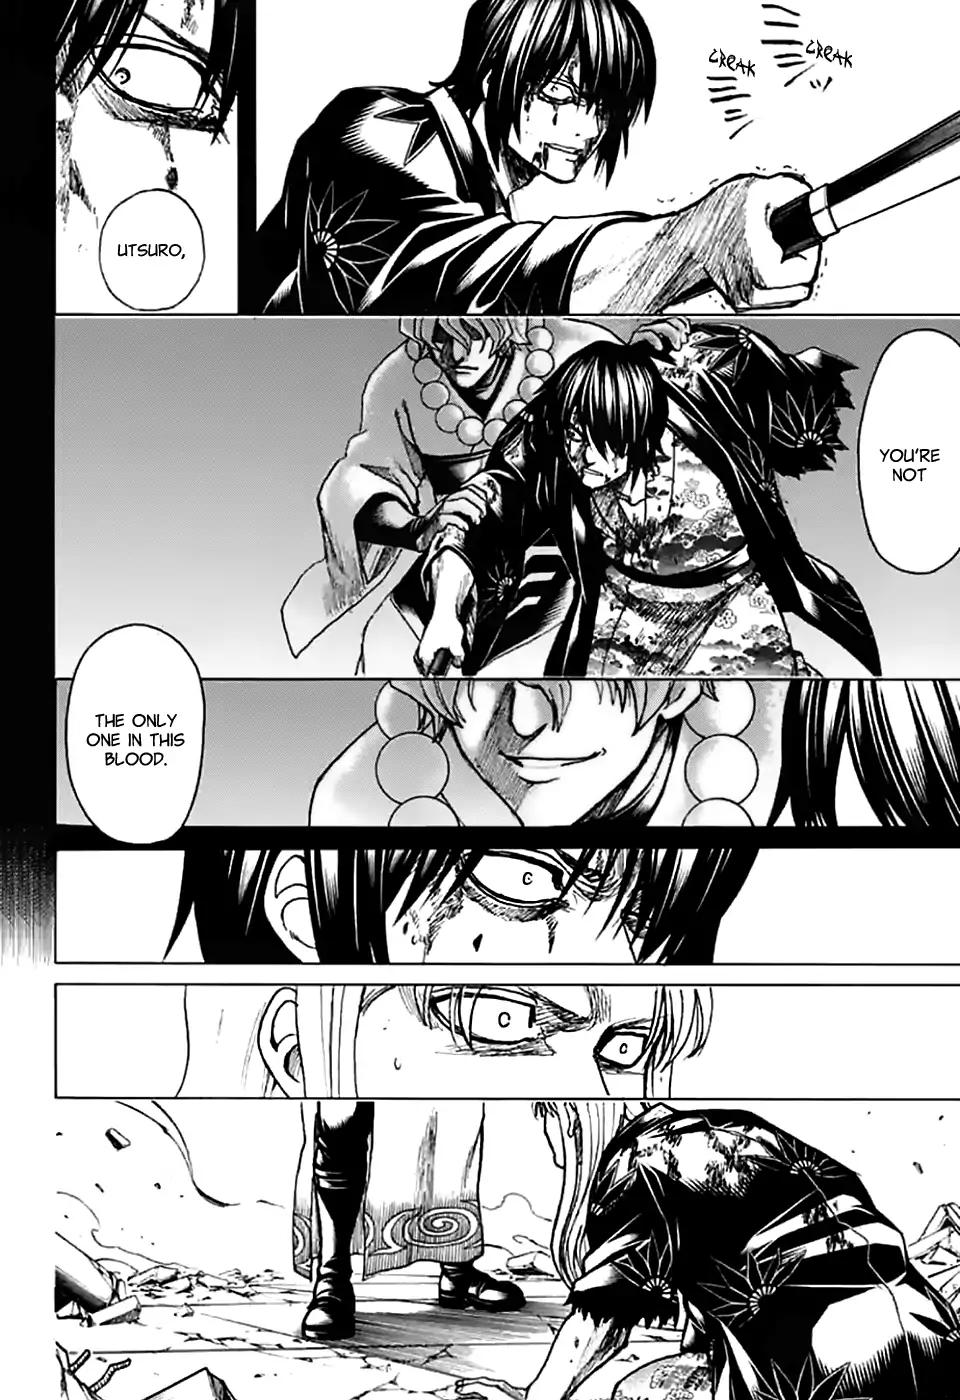 Gintama chapter 703 page 10